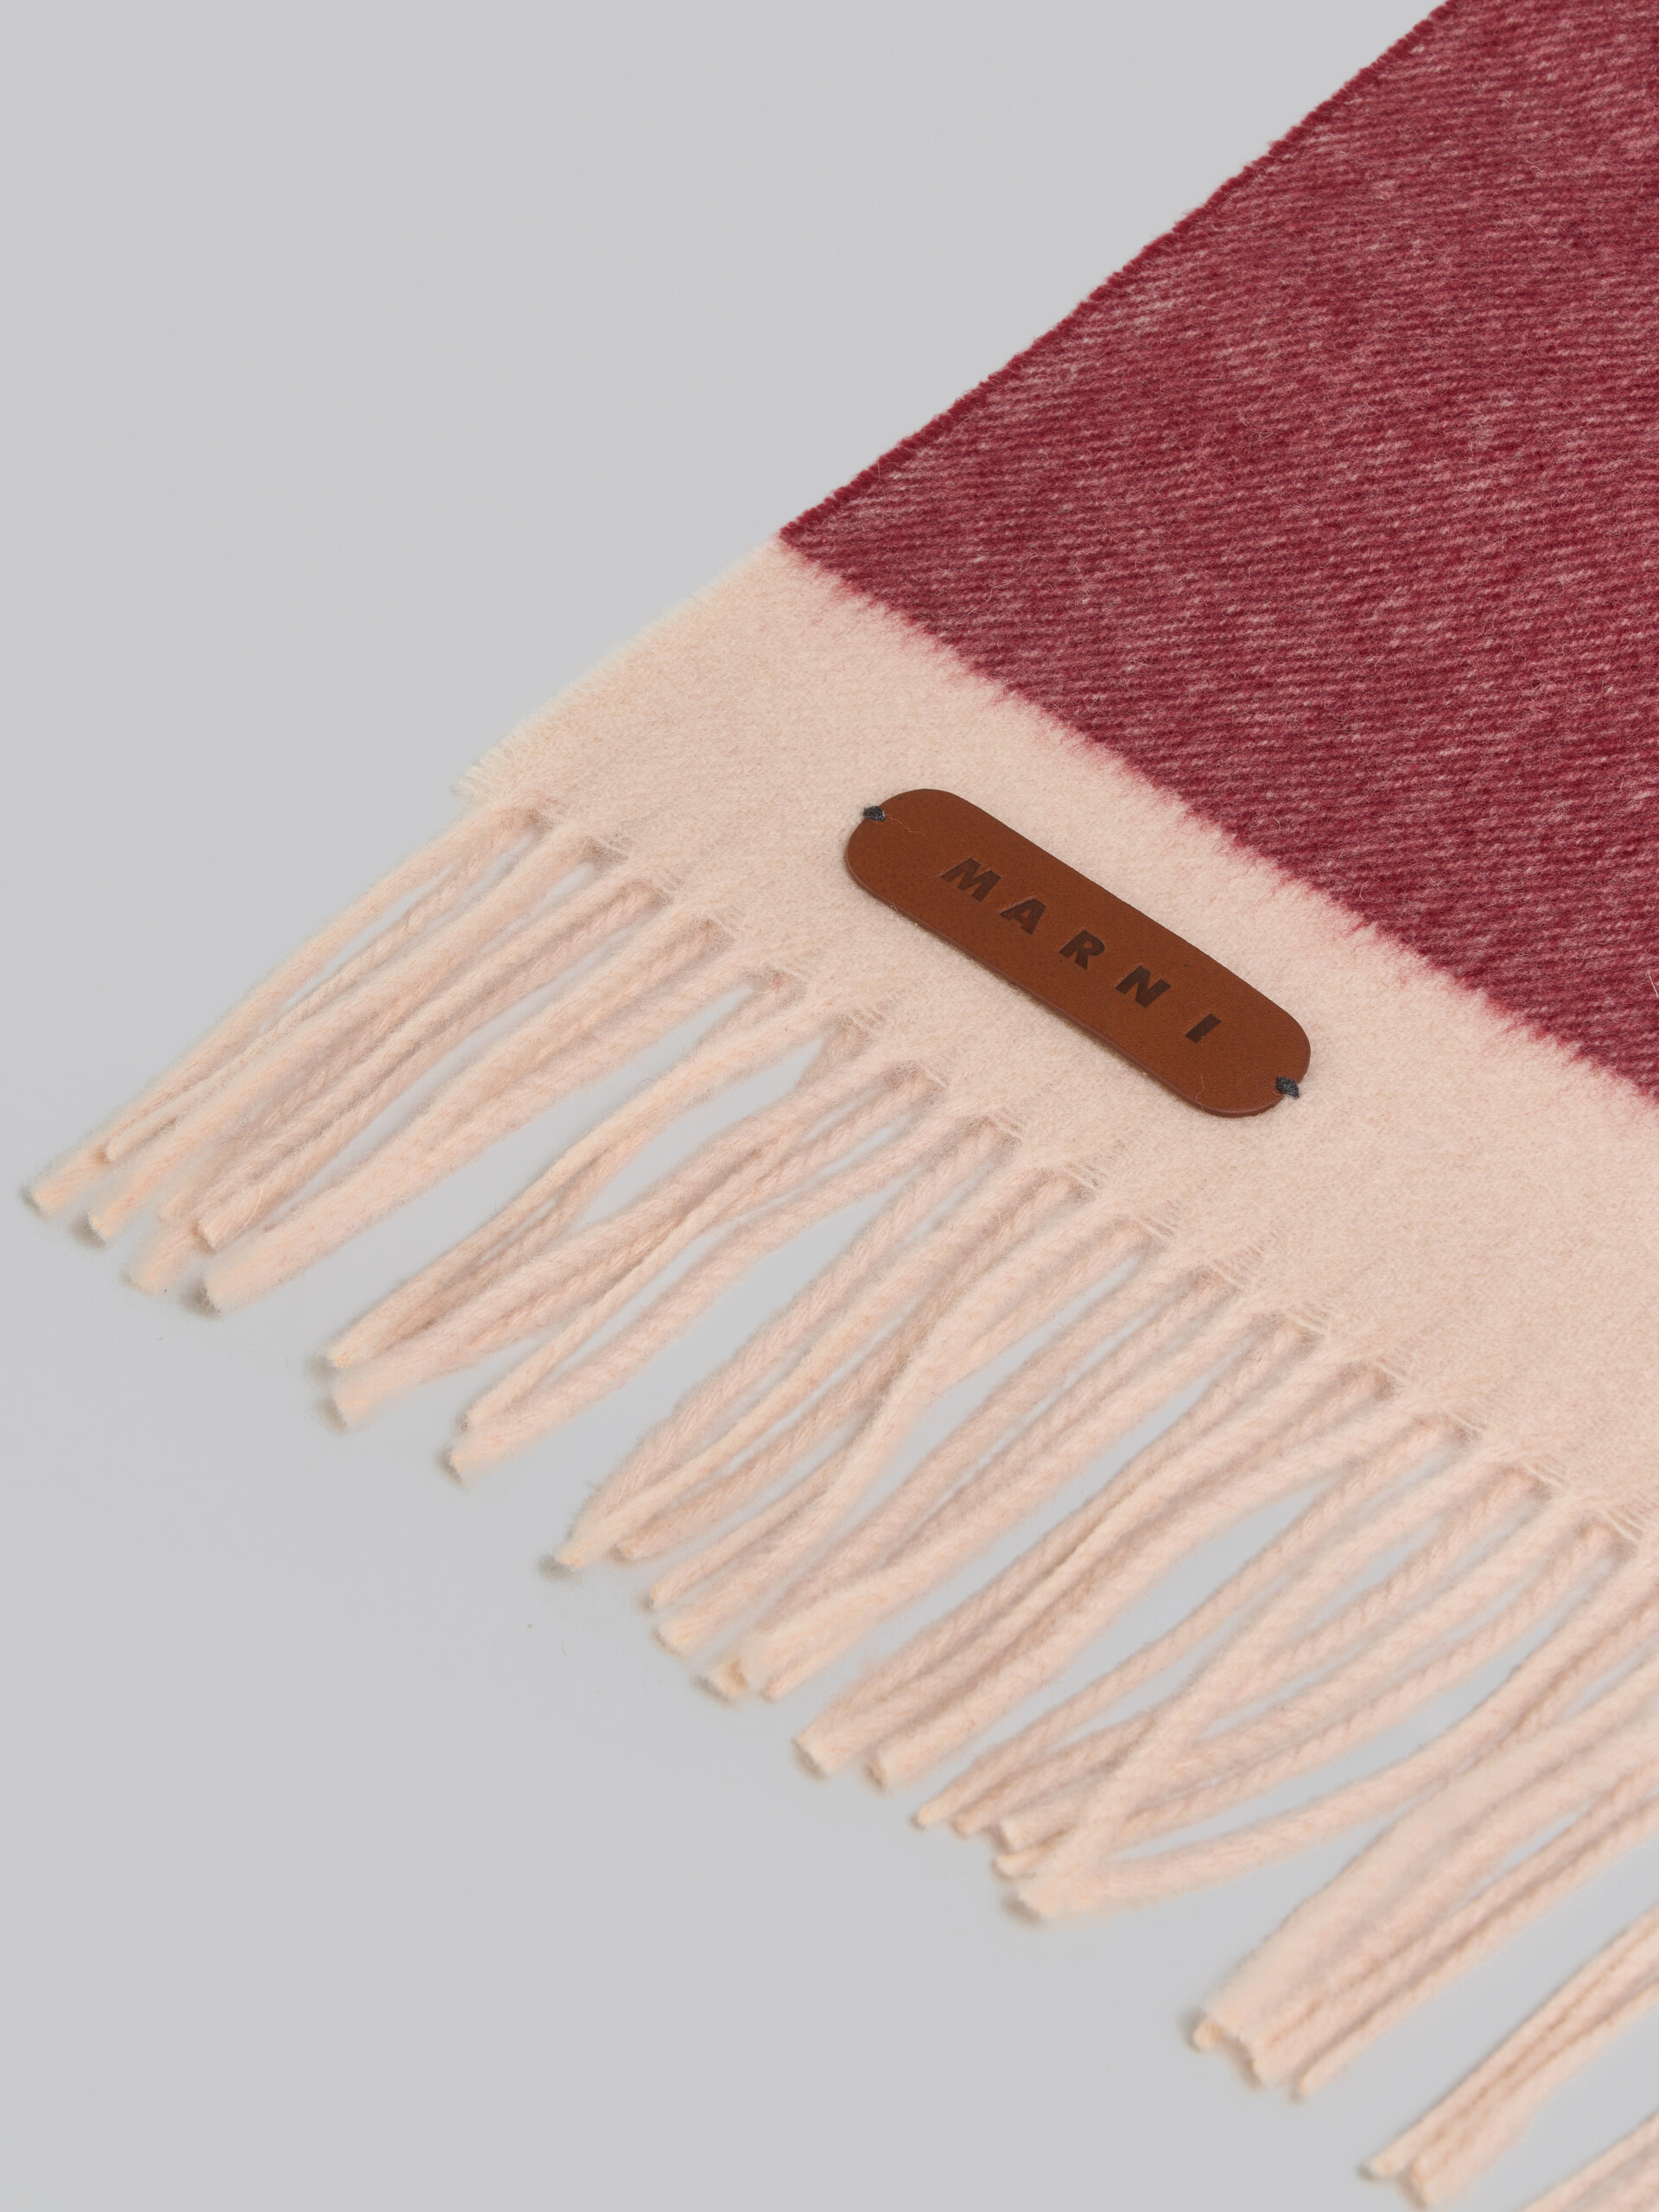 Burgundy virgin wool and cashmere scarf with leather patch - Scarves - Image 3